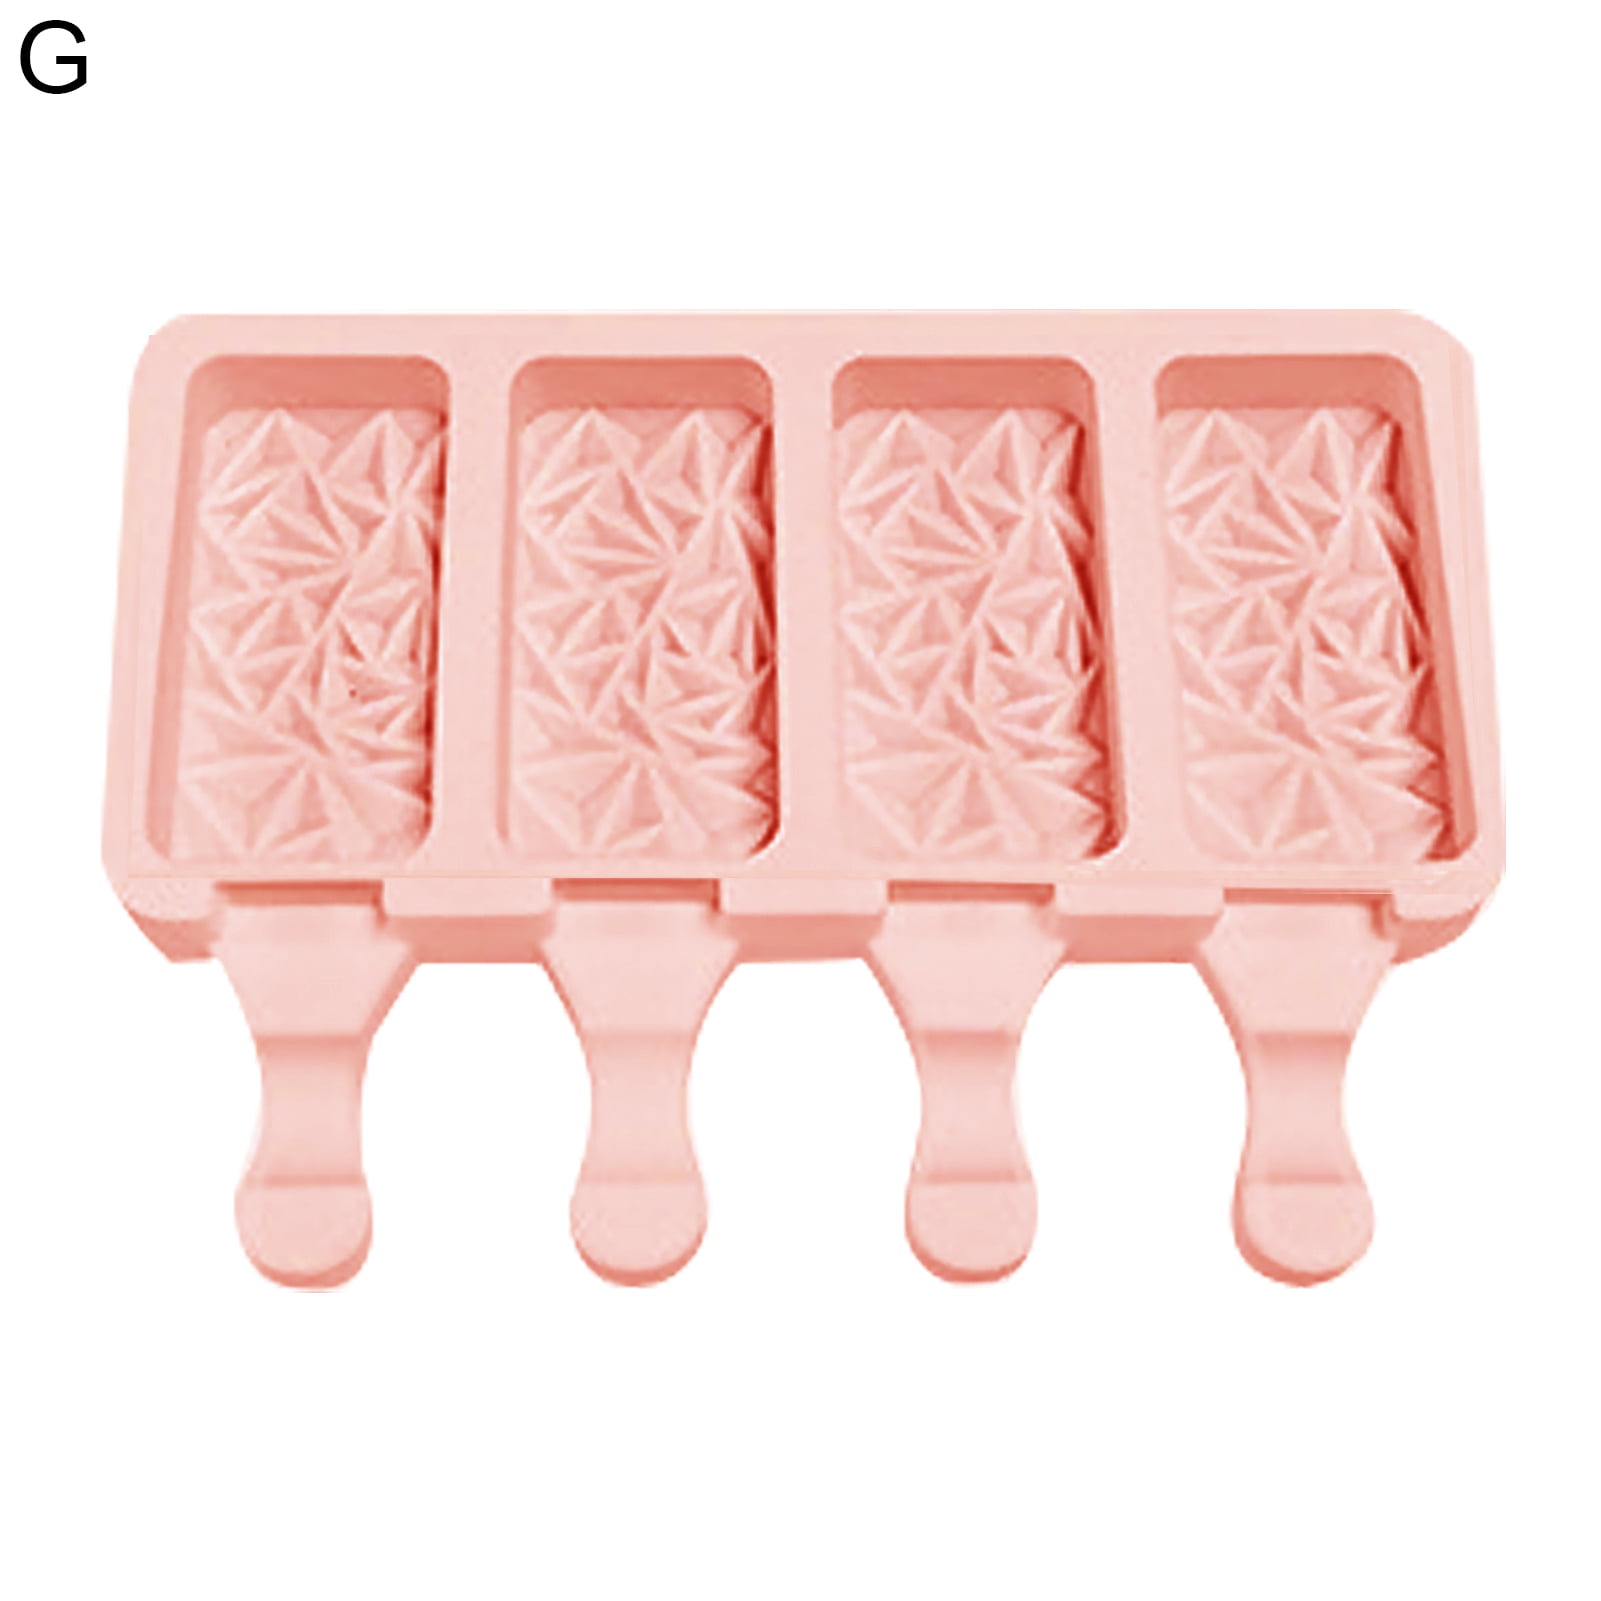 Details about   THE HOME STORE STACKING ICE CUBE TRAYS 2 pc in packs New PINK 